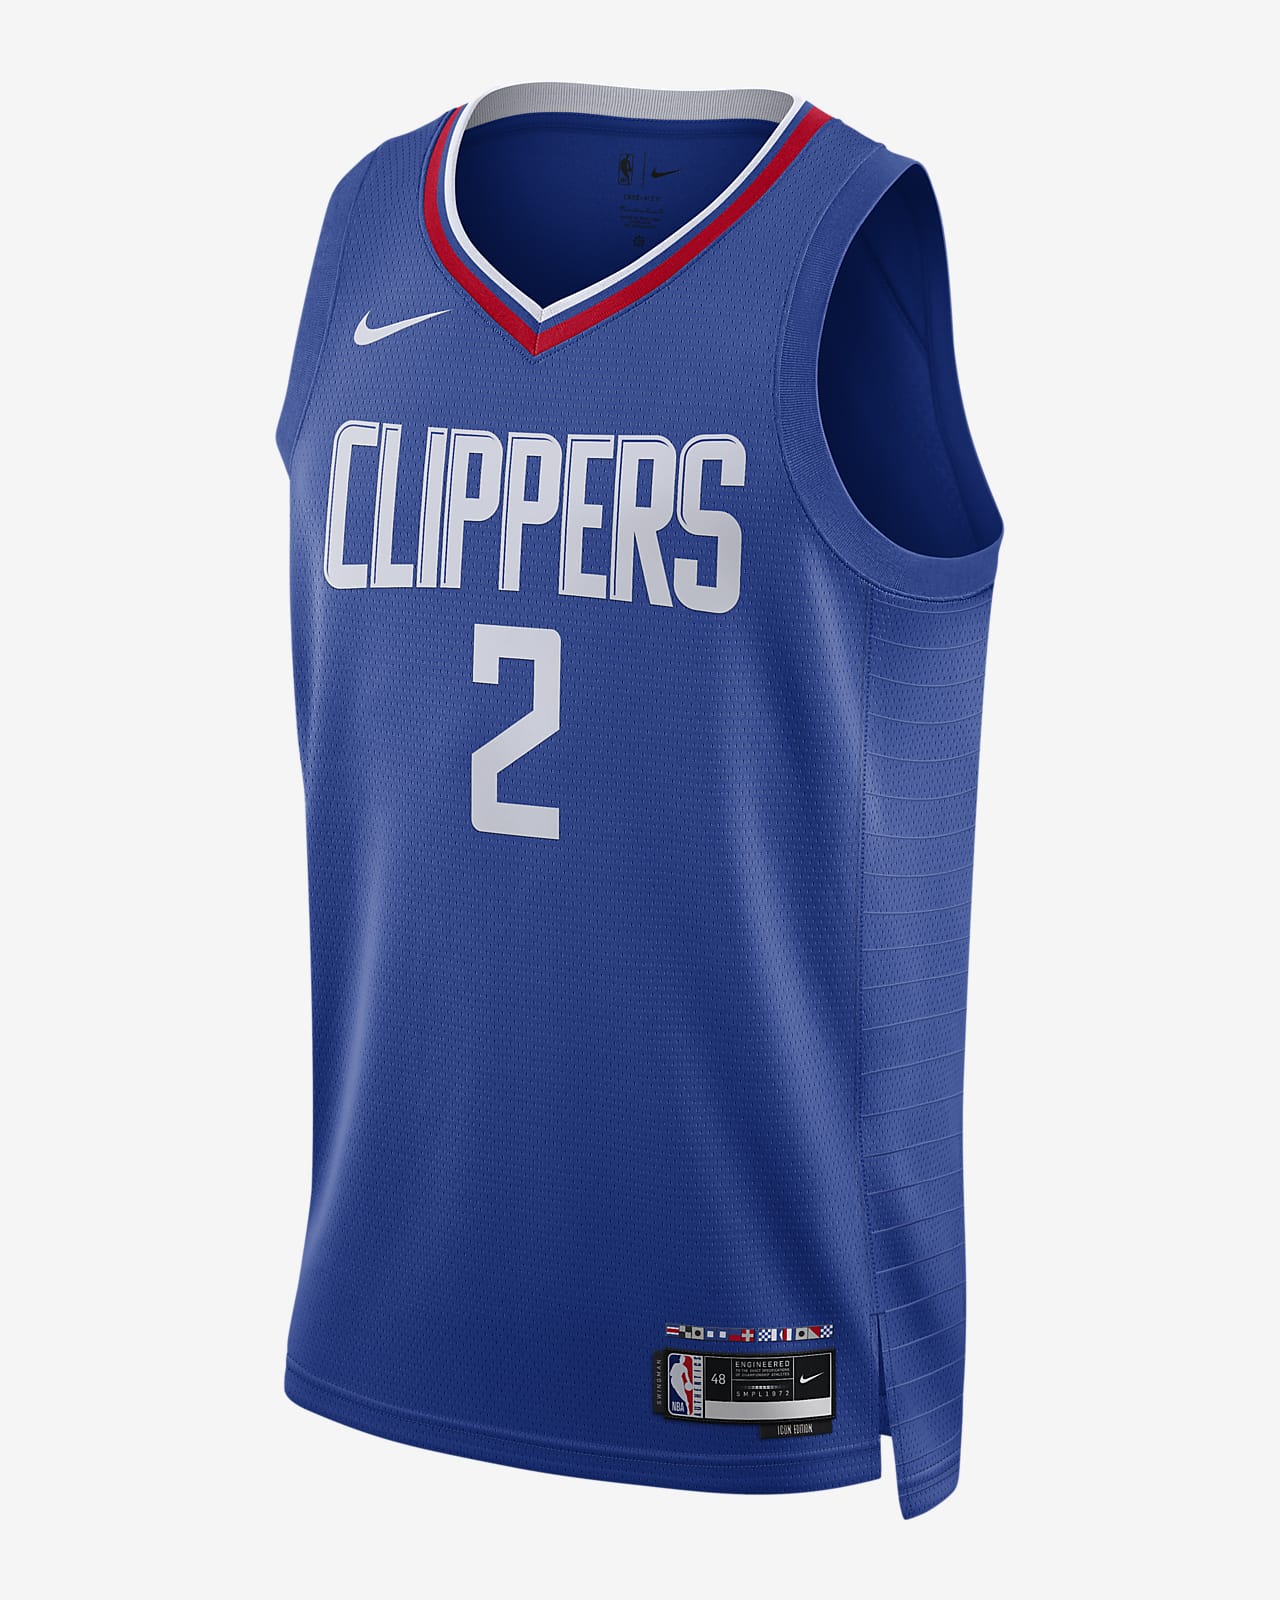 LA Clippers Big and Tall jersey